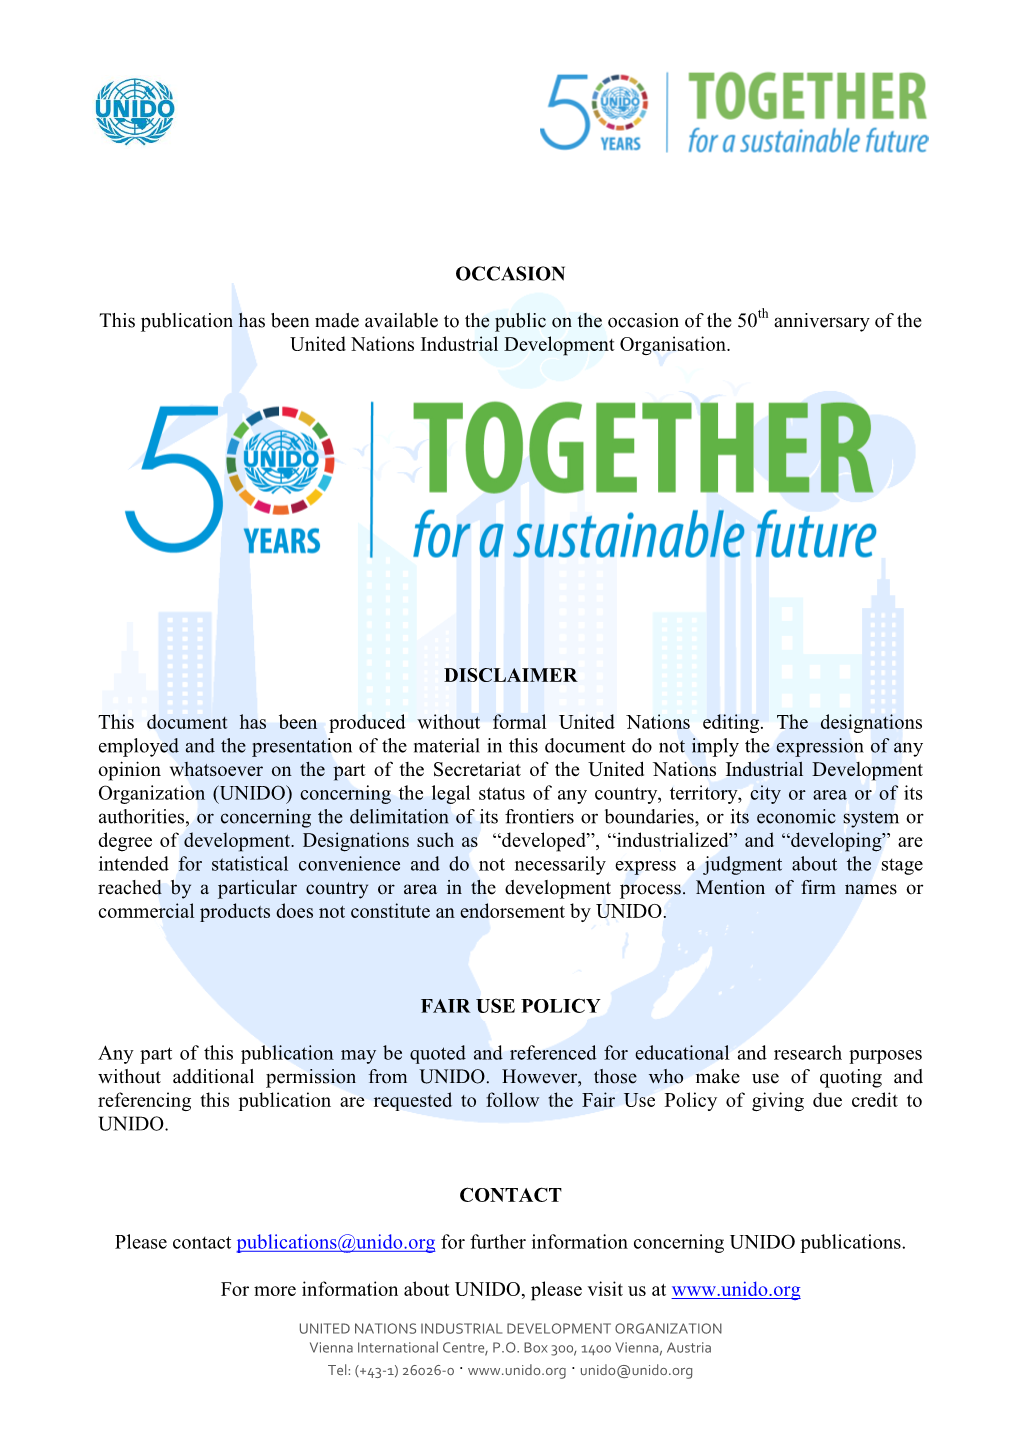 Ics-Unido Symposium on Science and Technology for Sustainable